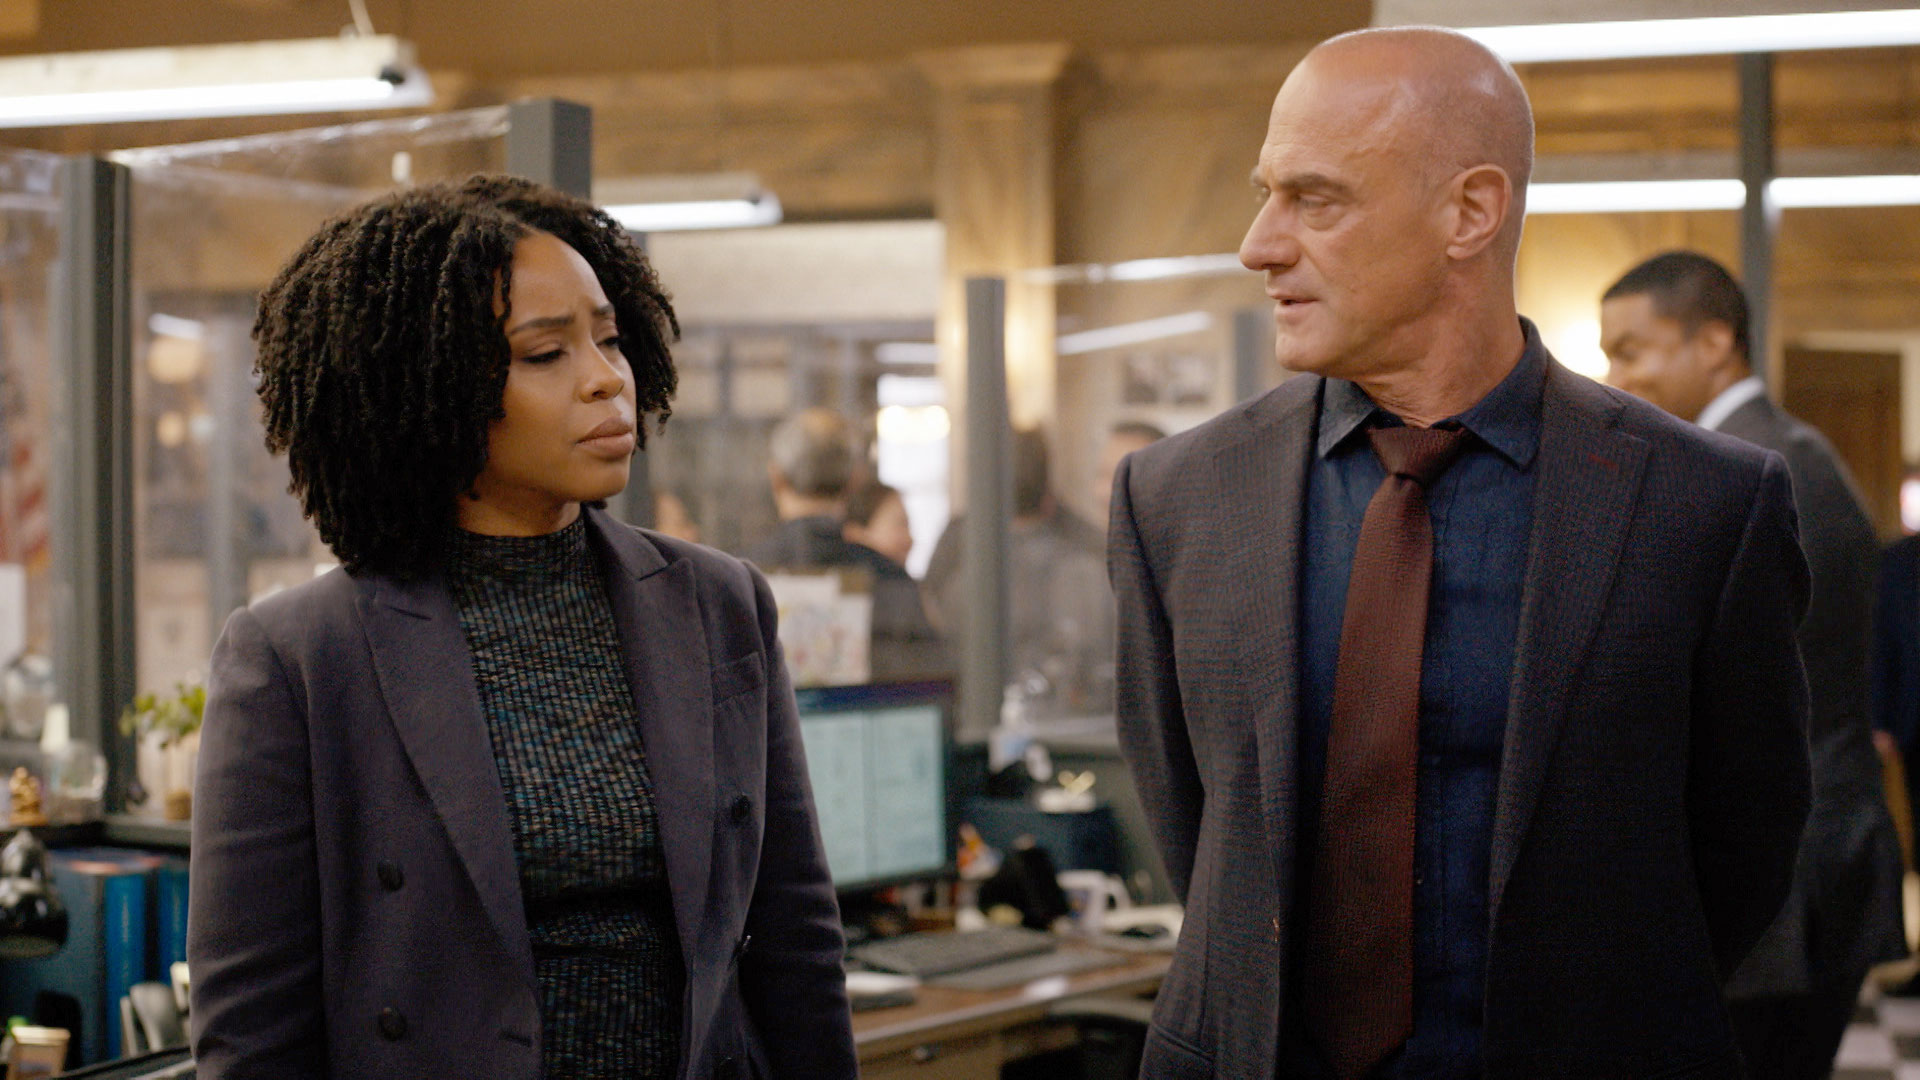 Stabler and Bell Learn Their Case Is Being Taken Over | NBC’s Law & Order: Organized Crime